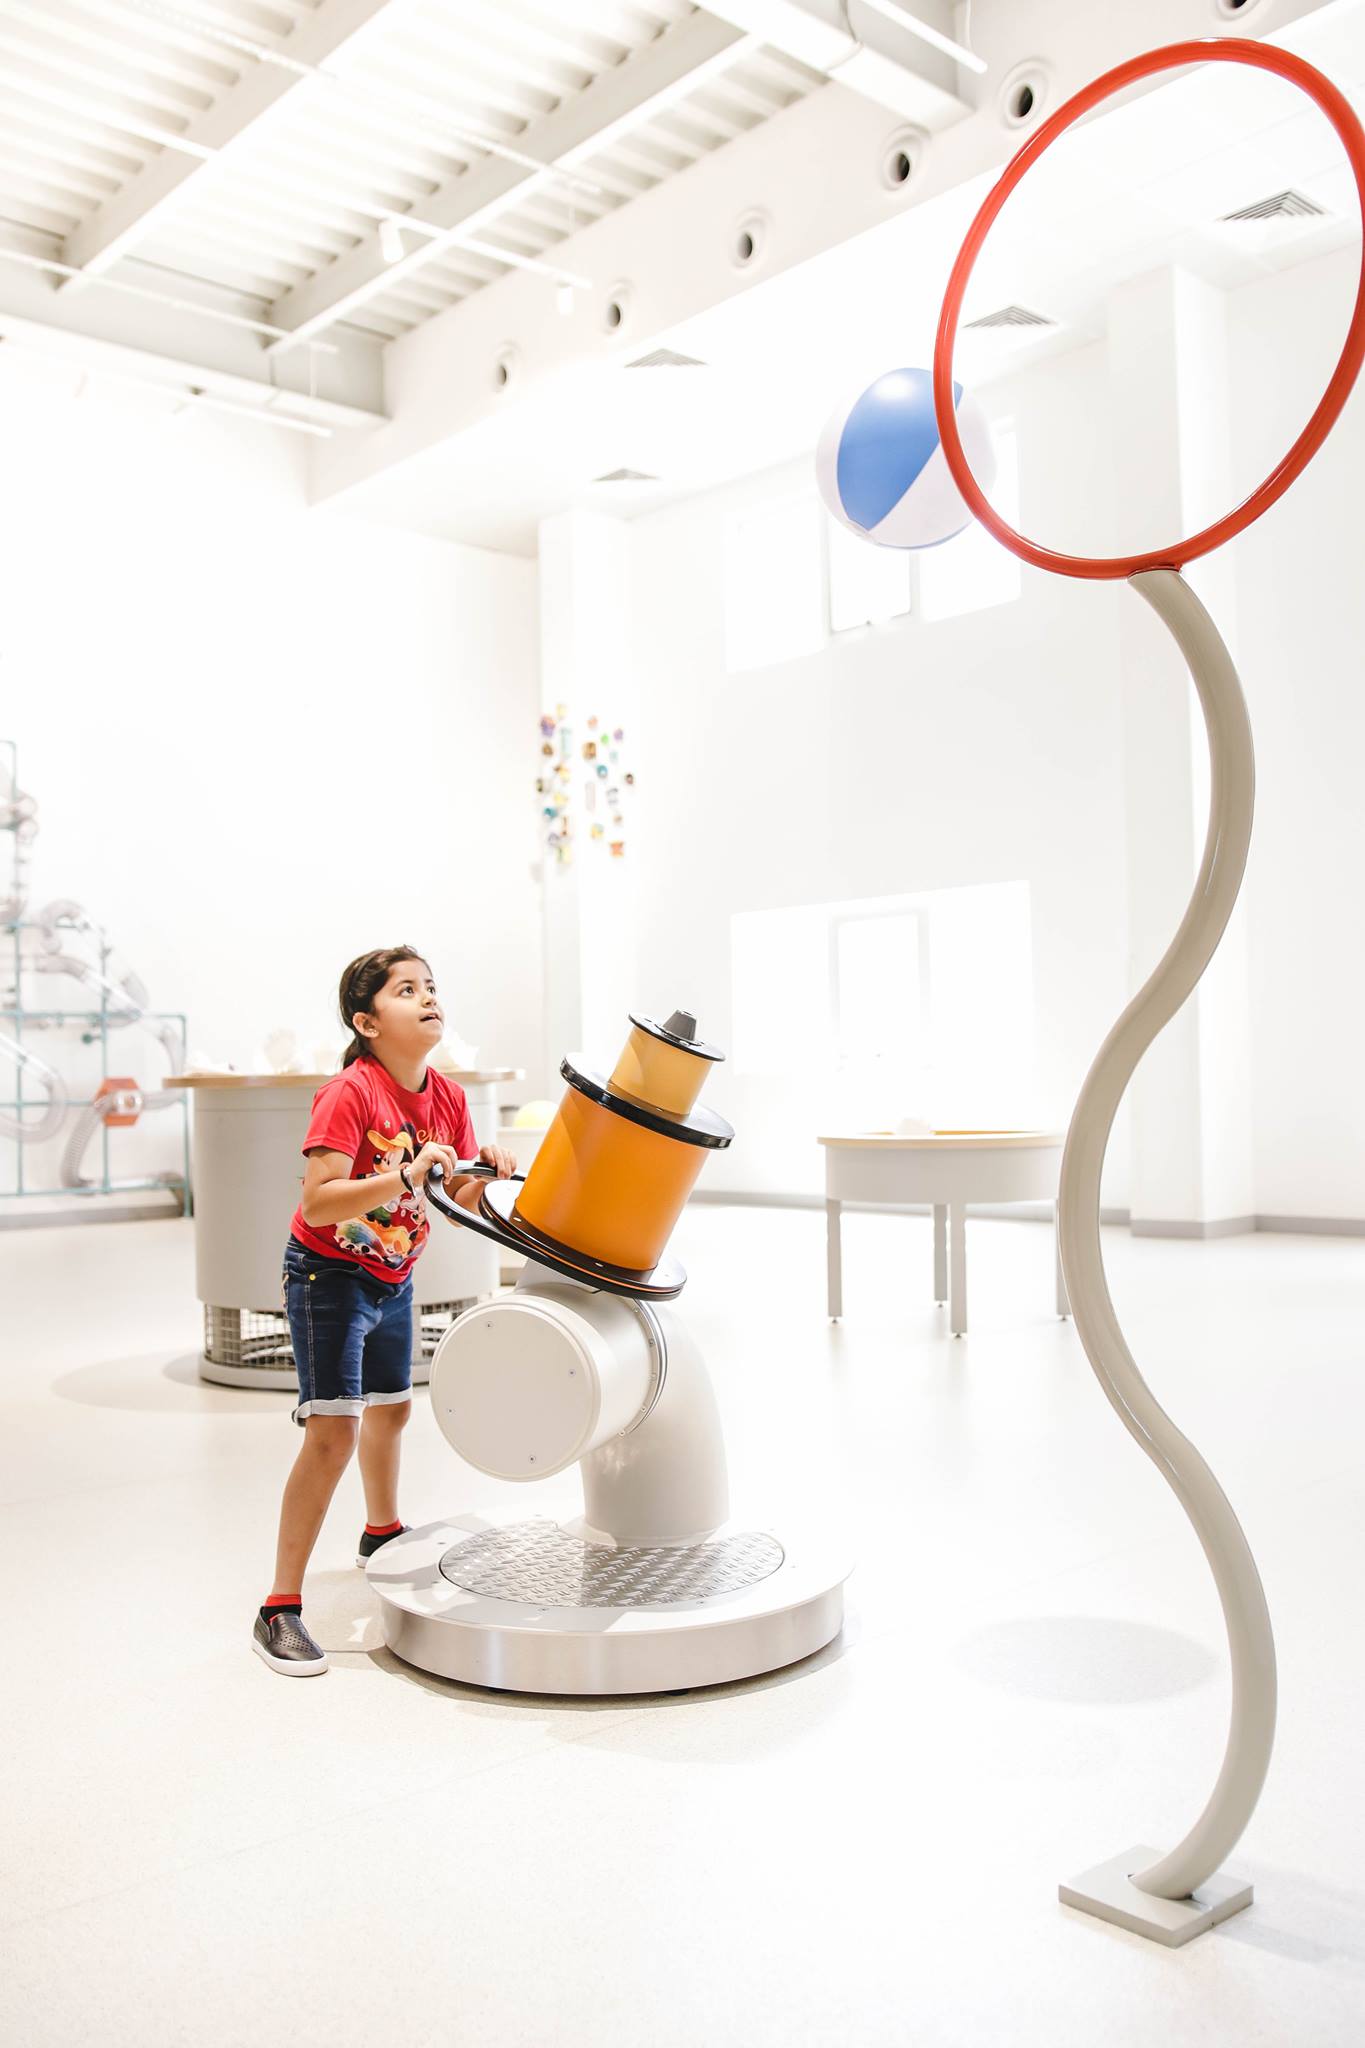 Dubai’s First Experiential Play Museum